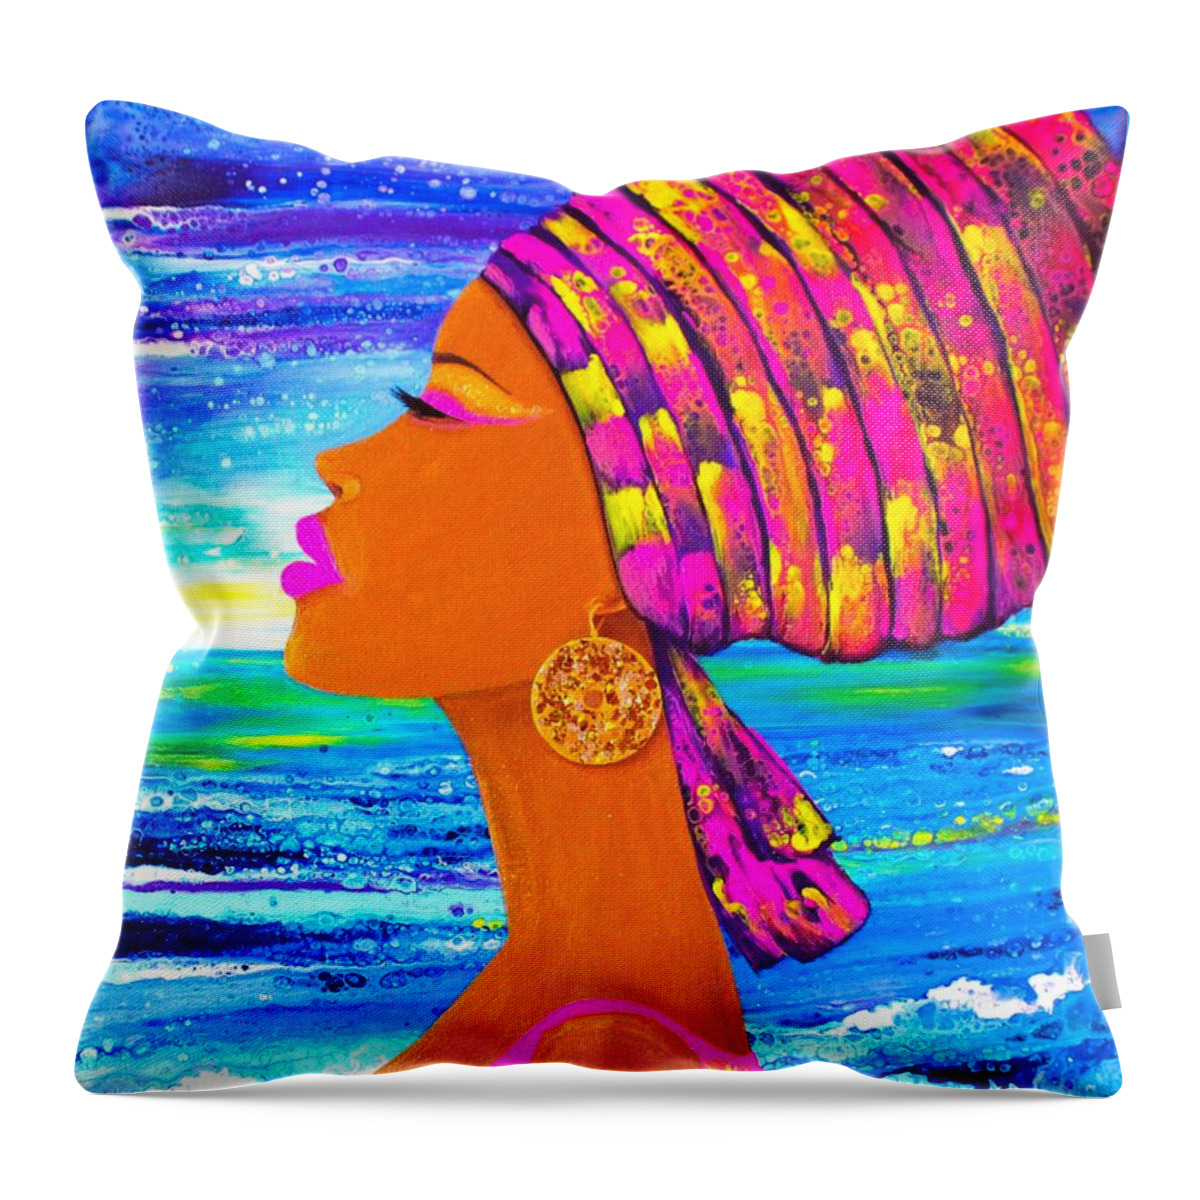 Artwork Art Wall Oil Painting Acrylic Art Nubian Queen Acrylic Abstract Art Lady Sea Throw Pillow featuring the painting Nubian Queen by Tanya Harr